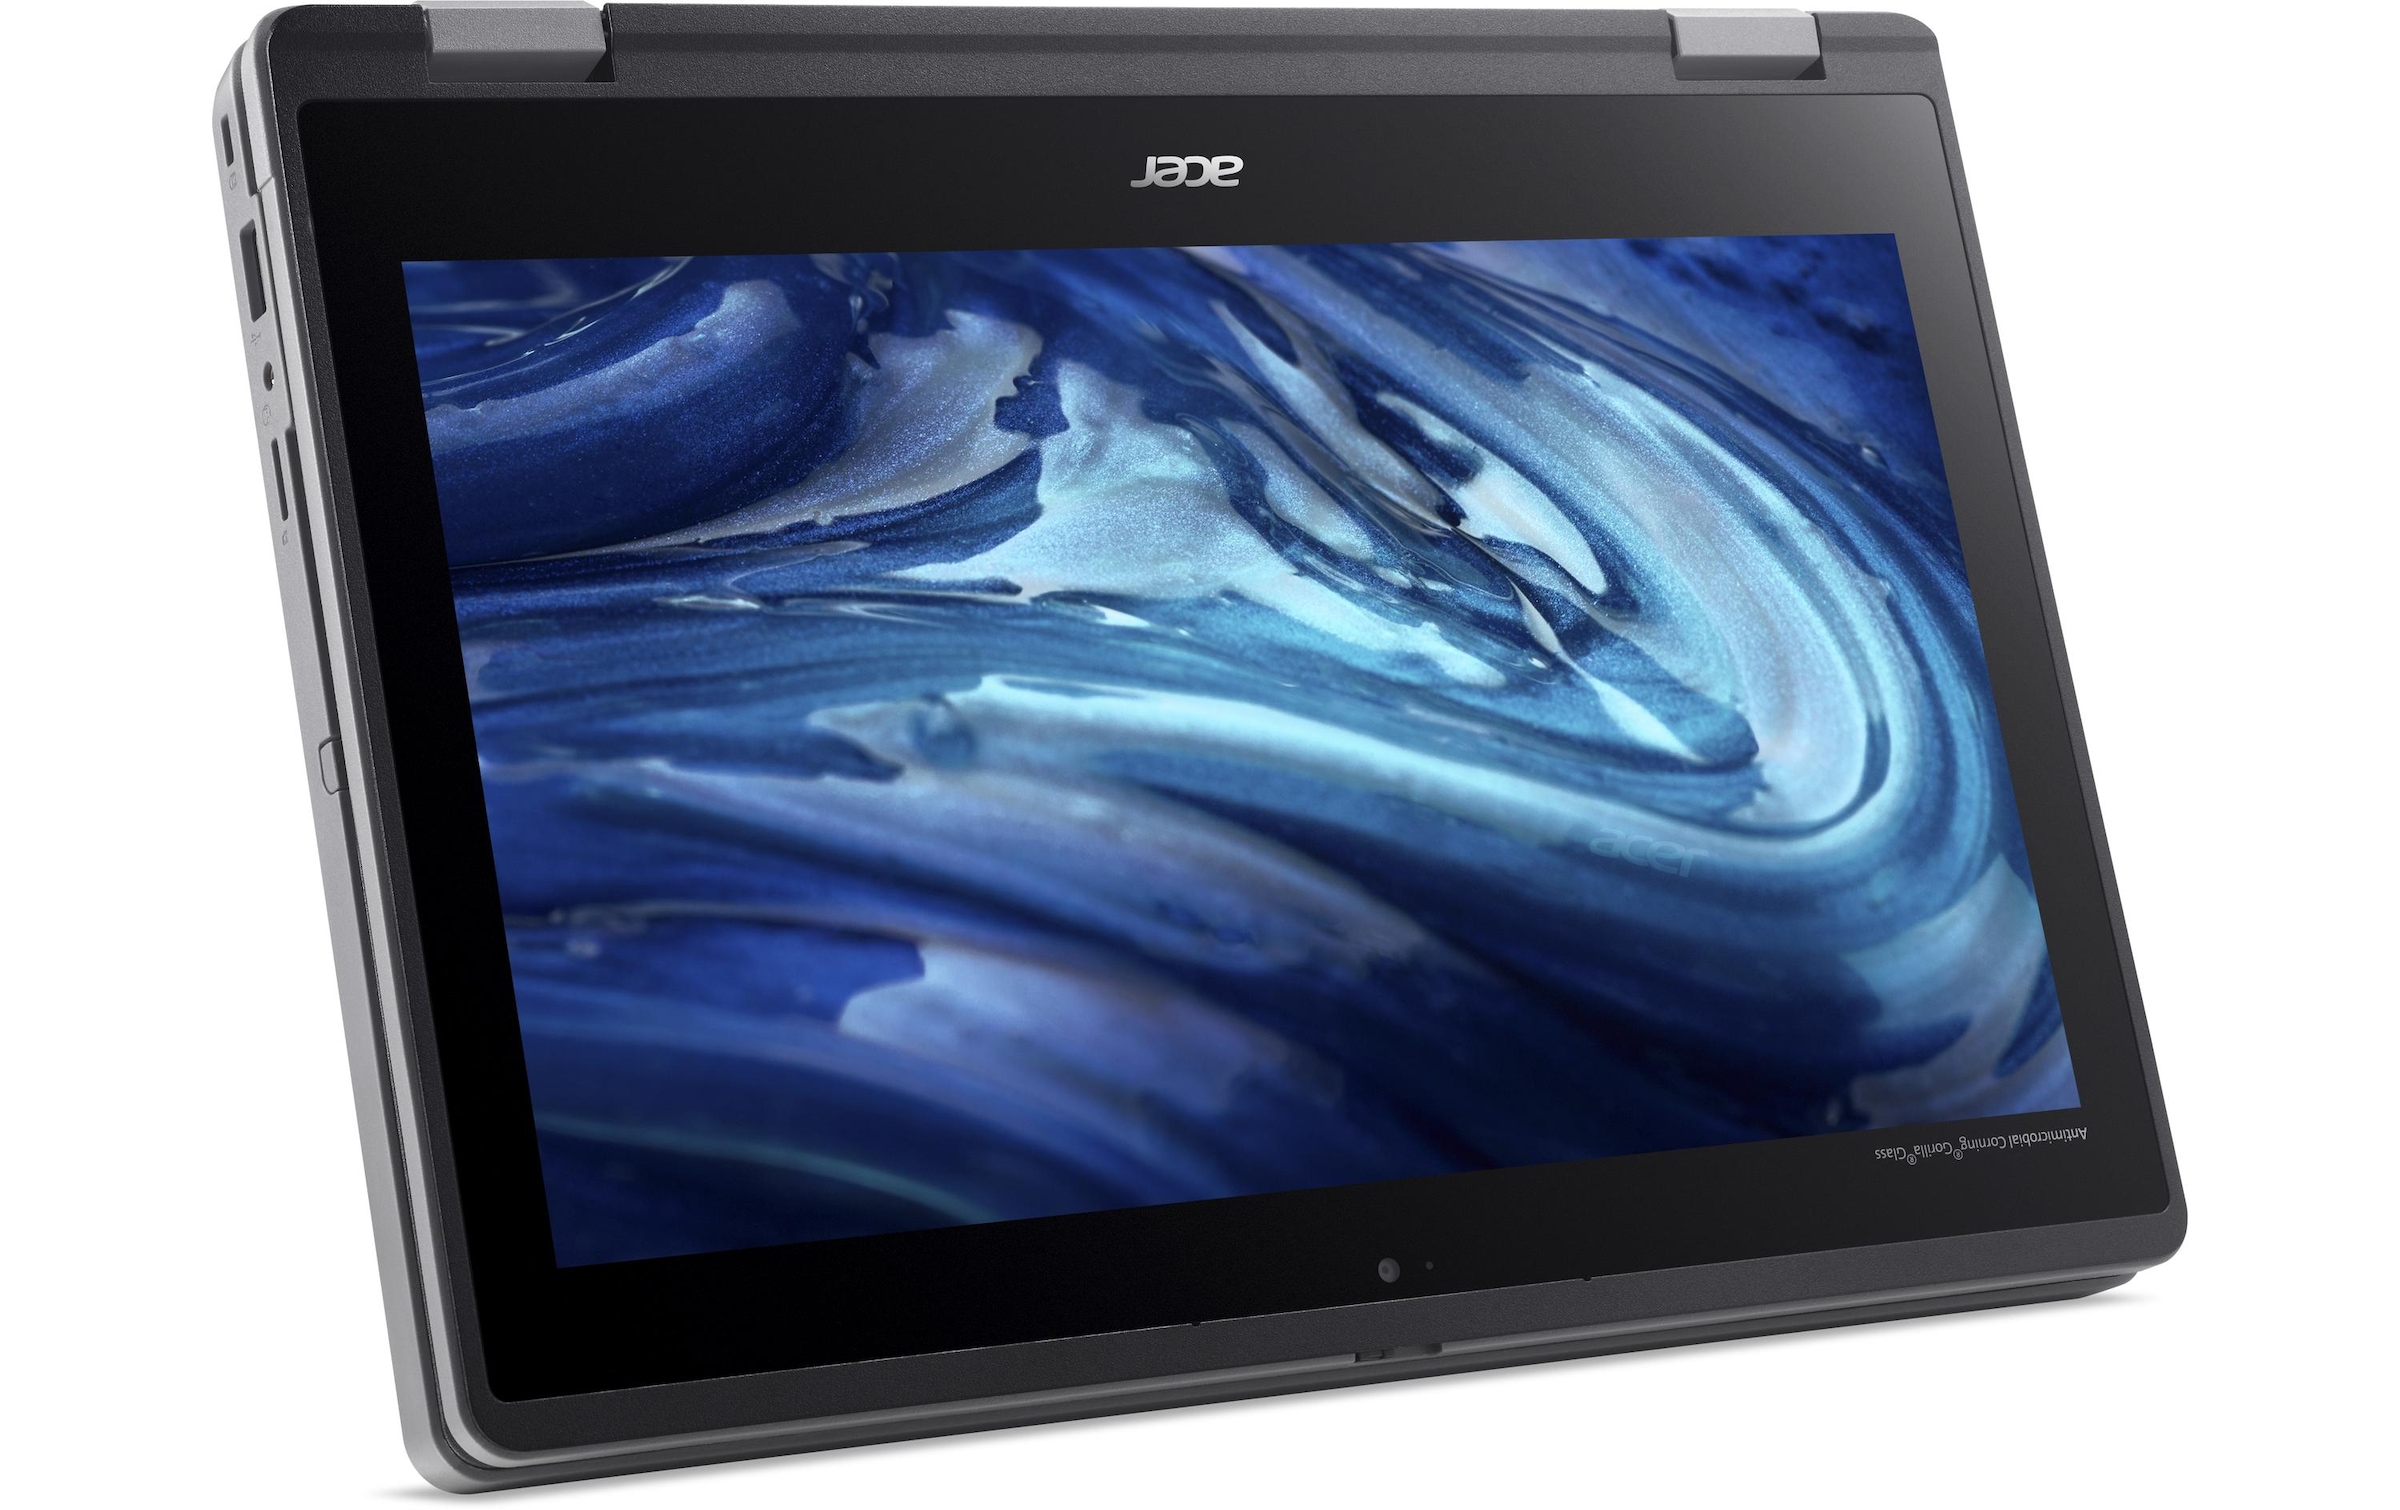 Acer Convertible Notebook »Acer Travelmate B311R-33, N100, W11P«, 29,34 cm, / 11,6 Zoll, Intel, UHD Graphics